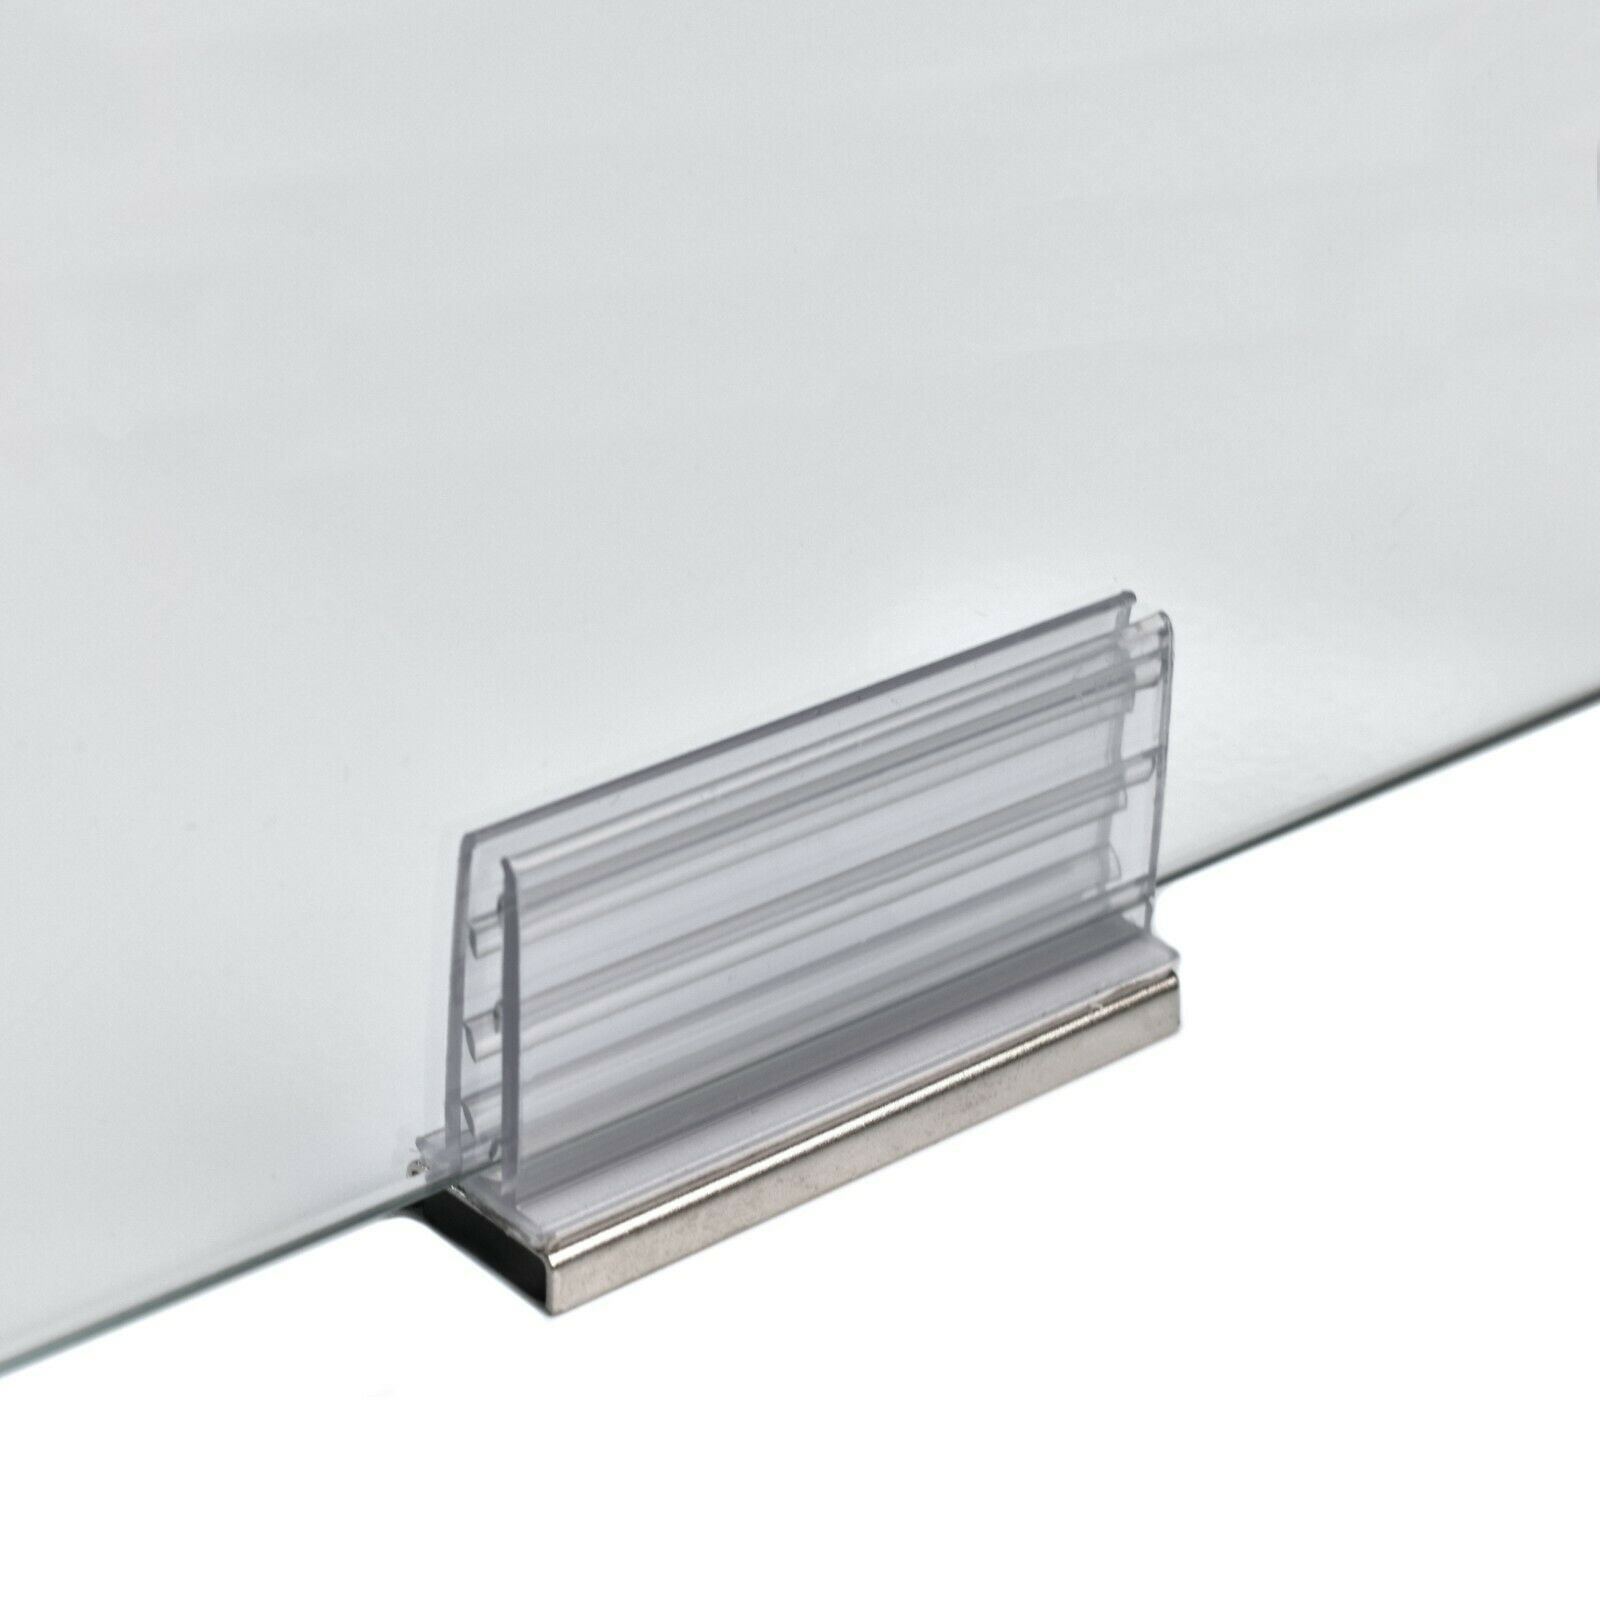 Details about   Adhesive Sneeze Guard HolderPlastic Sheet BracketPartition Sheet Mount 